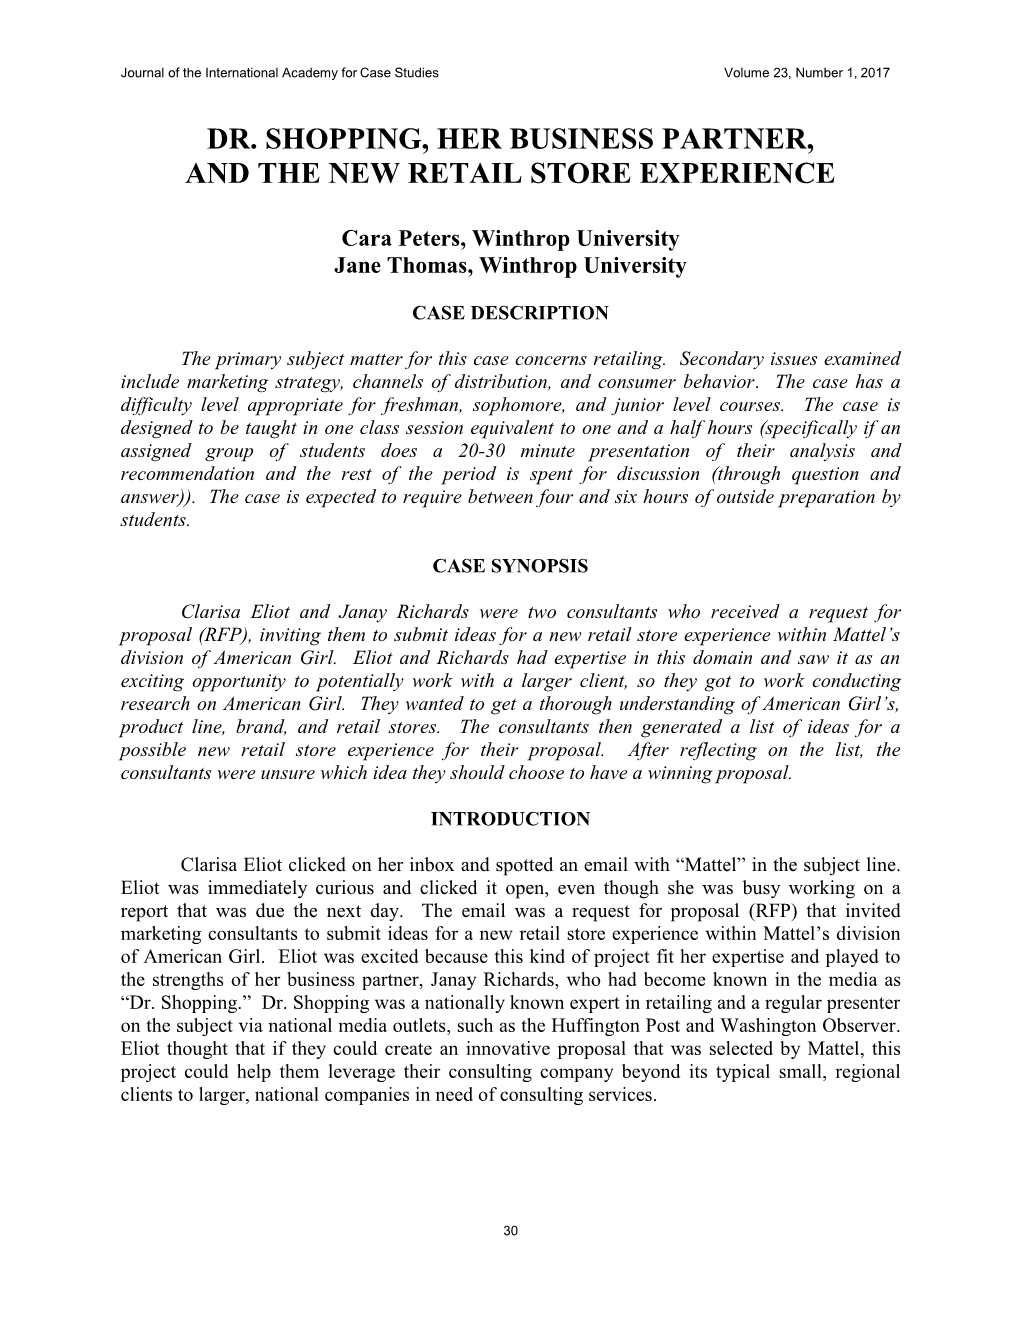 Dr. Shopping, Her Business Partner, and the New Retail Store Experience